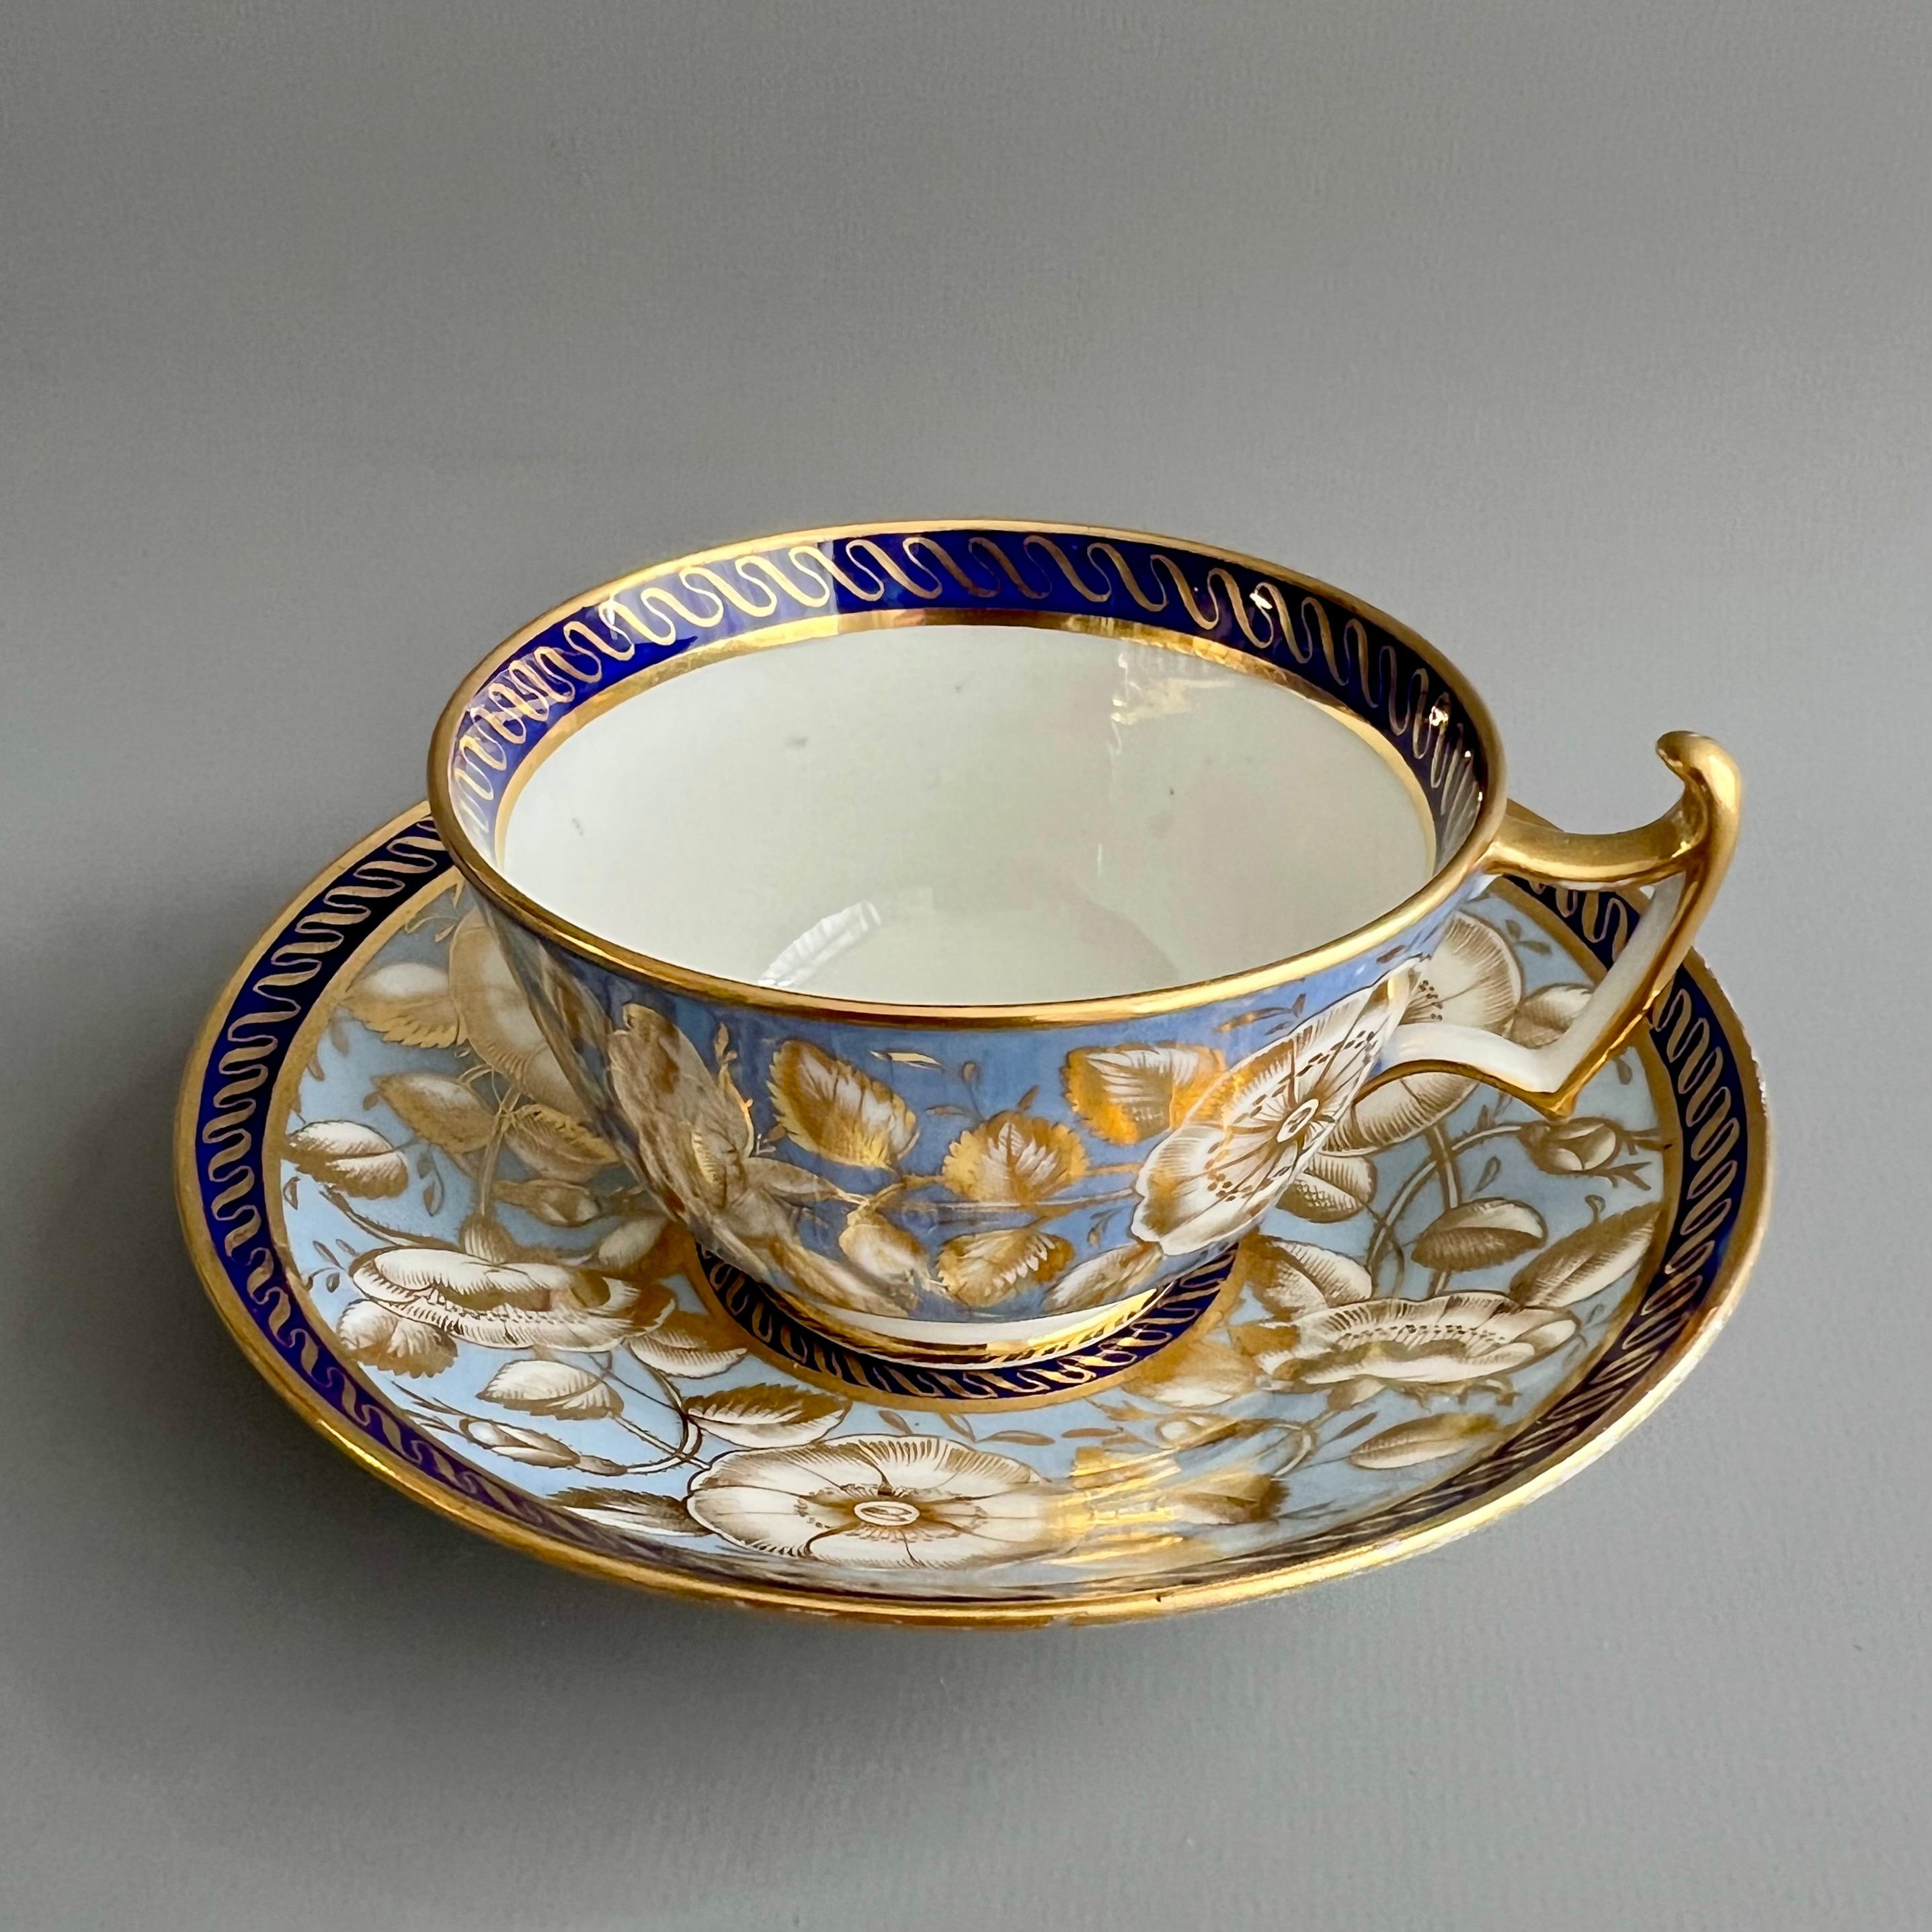 This is a beautiful teacup and saucer made by John Rose / Coalport in about 1815, which was the Regency era. The set is decorated in a gorgeous periwinkle blue ground with rich gilt and white wild roses and a cobalt blue rim with gilt.

Coalport